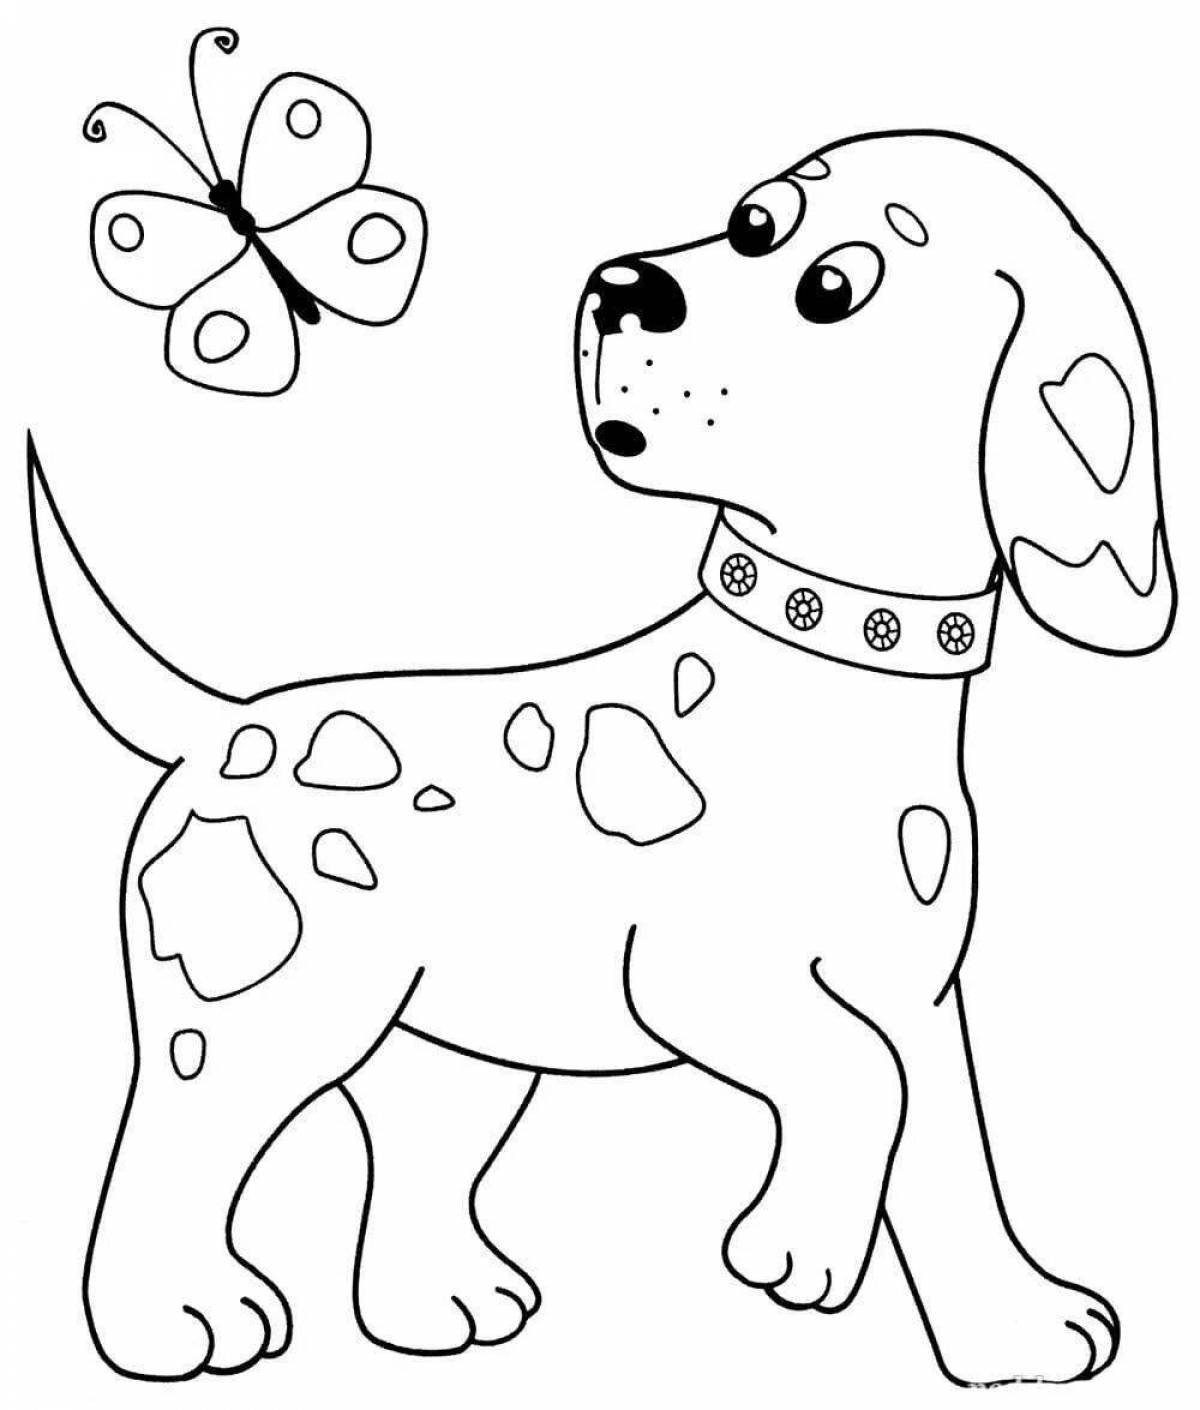 Dog play coloring for children 7-8 years old